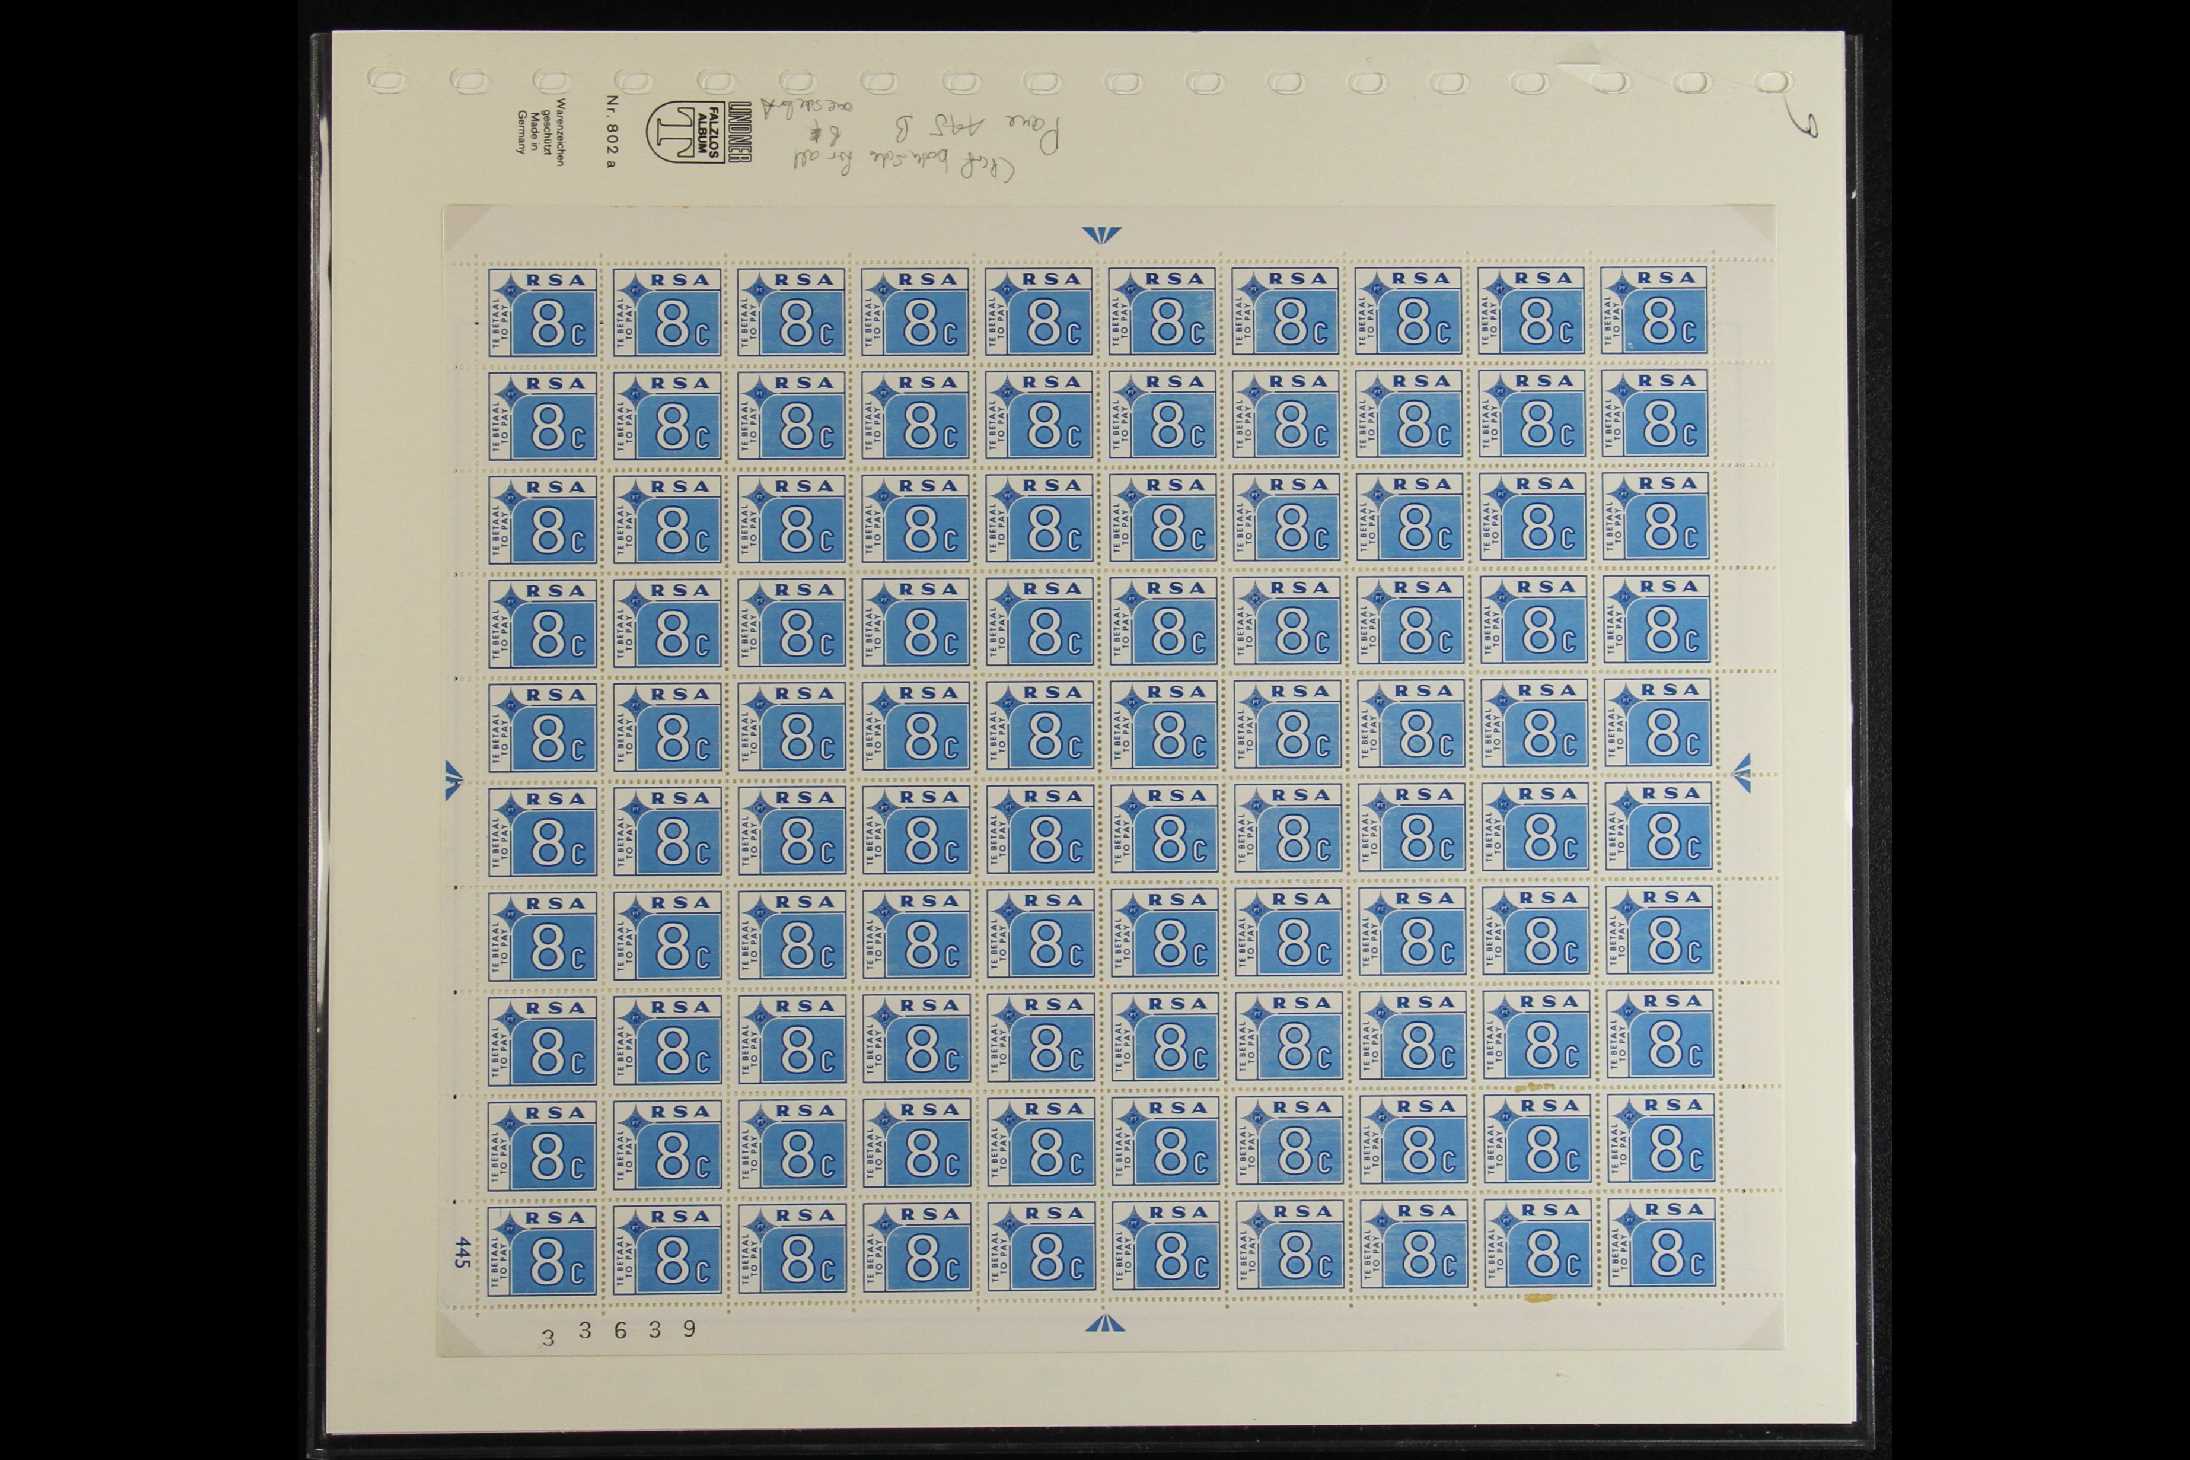 SOUTH AFRICA POSTAGE DUES 1972 complete set, SG D75/80, complete sheet 100 never hinged mint, - Image 5 of 7